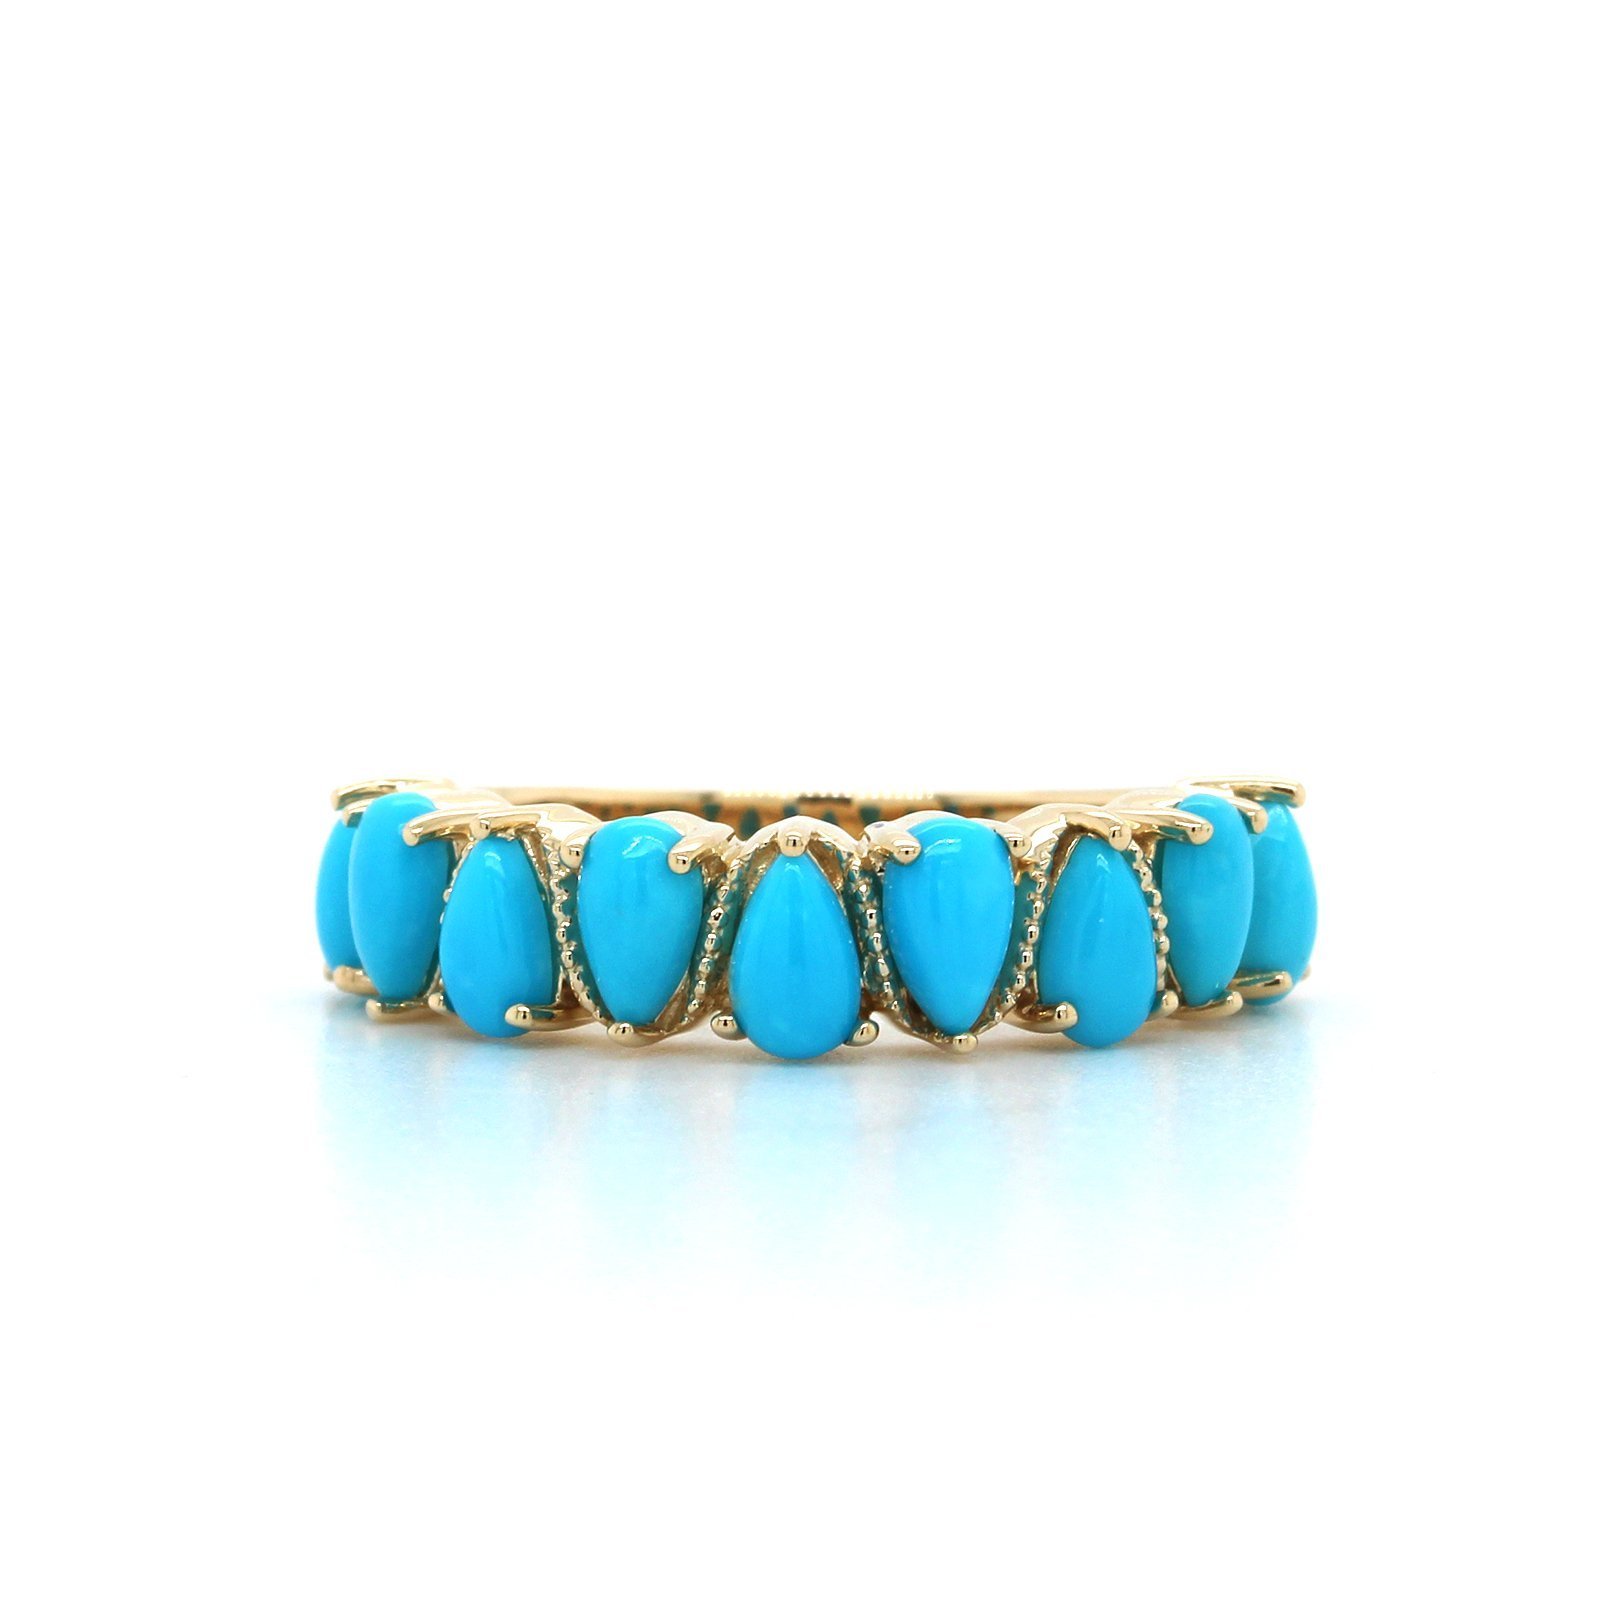 The-Lola-14K-Yellow-Gold-Pear-Shape-Turquoise-Cabochon-Ring-14K-Yellow-Gold-front-MSR2278.jpeg